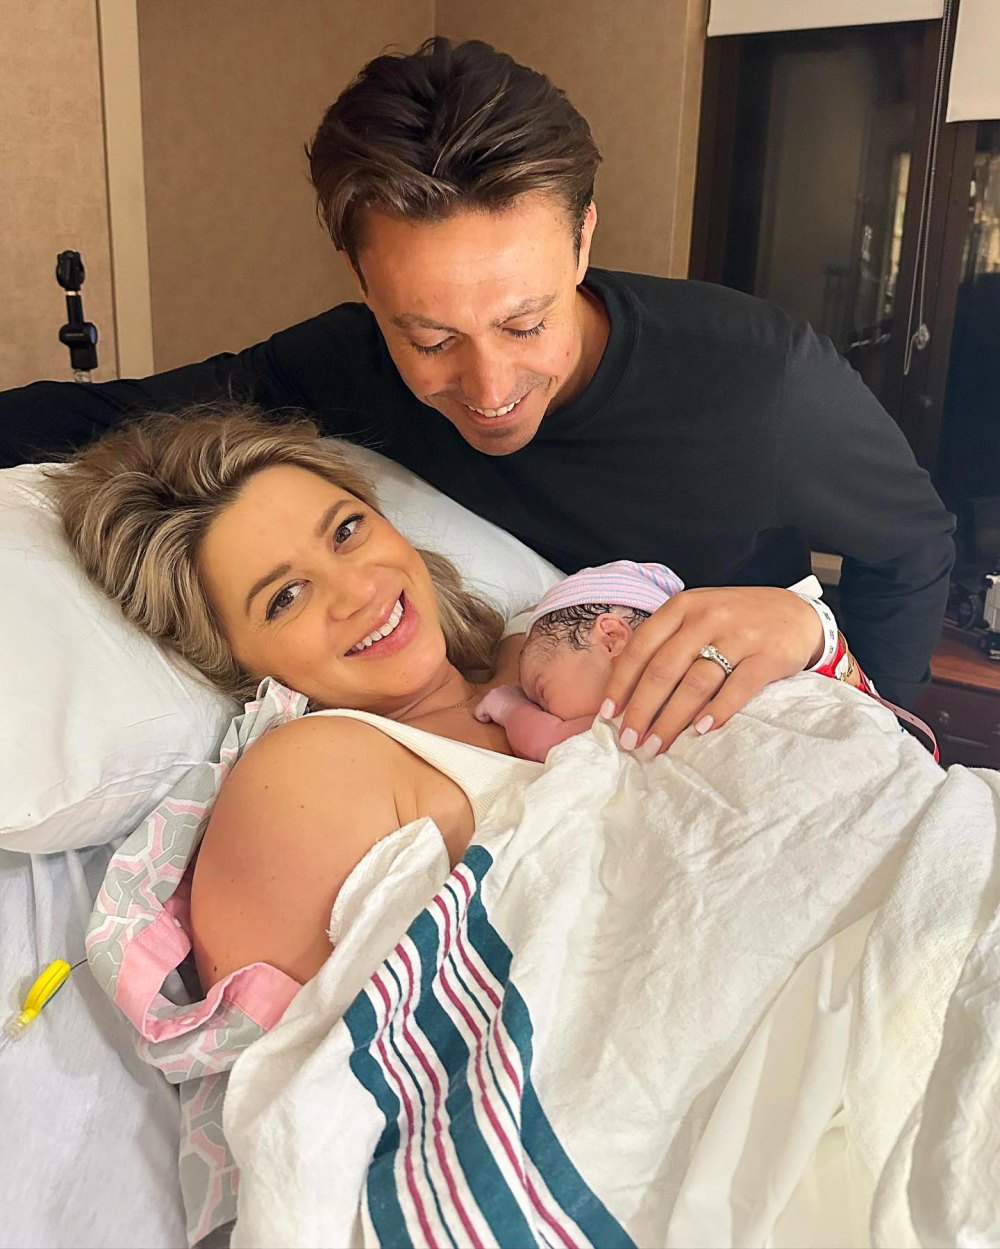 Bachelor Nation s Lesley Murphy Gives Birth Welcomes Baby No. 2 With Husband Alex Kavanagh 173